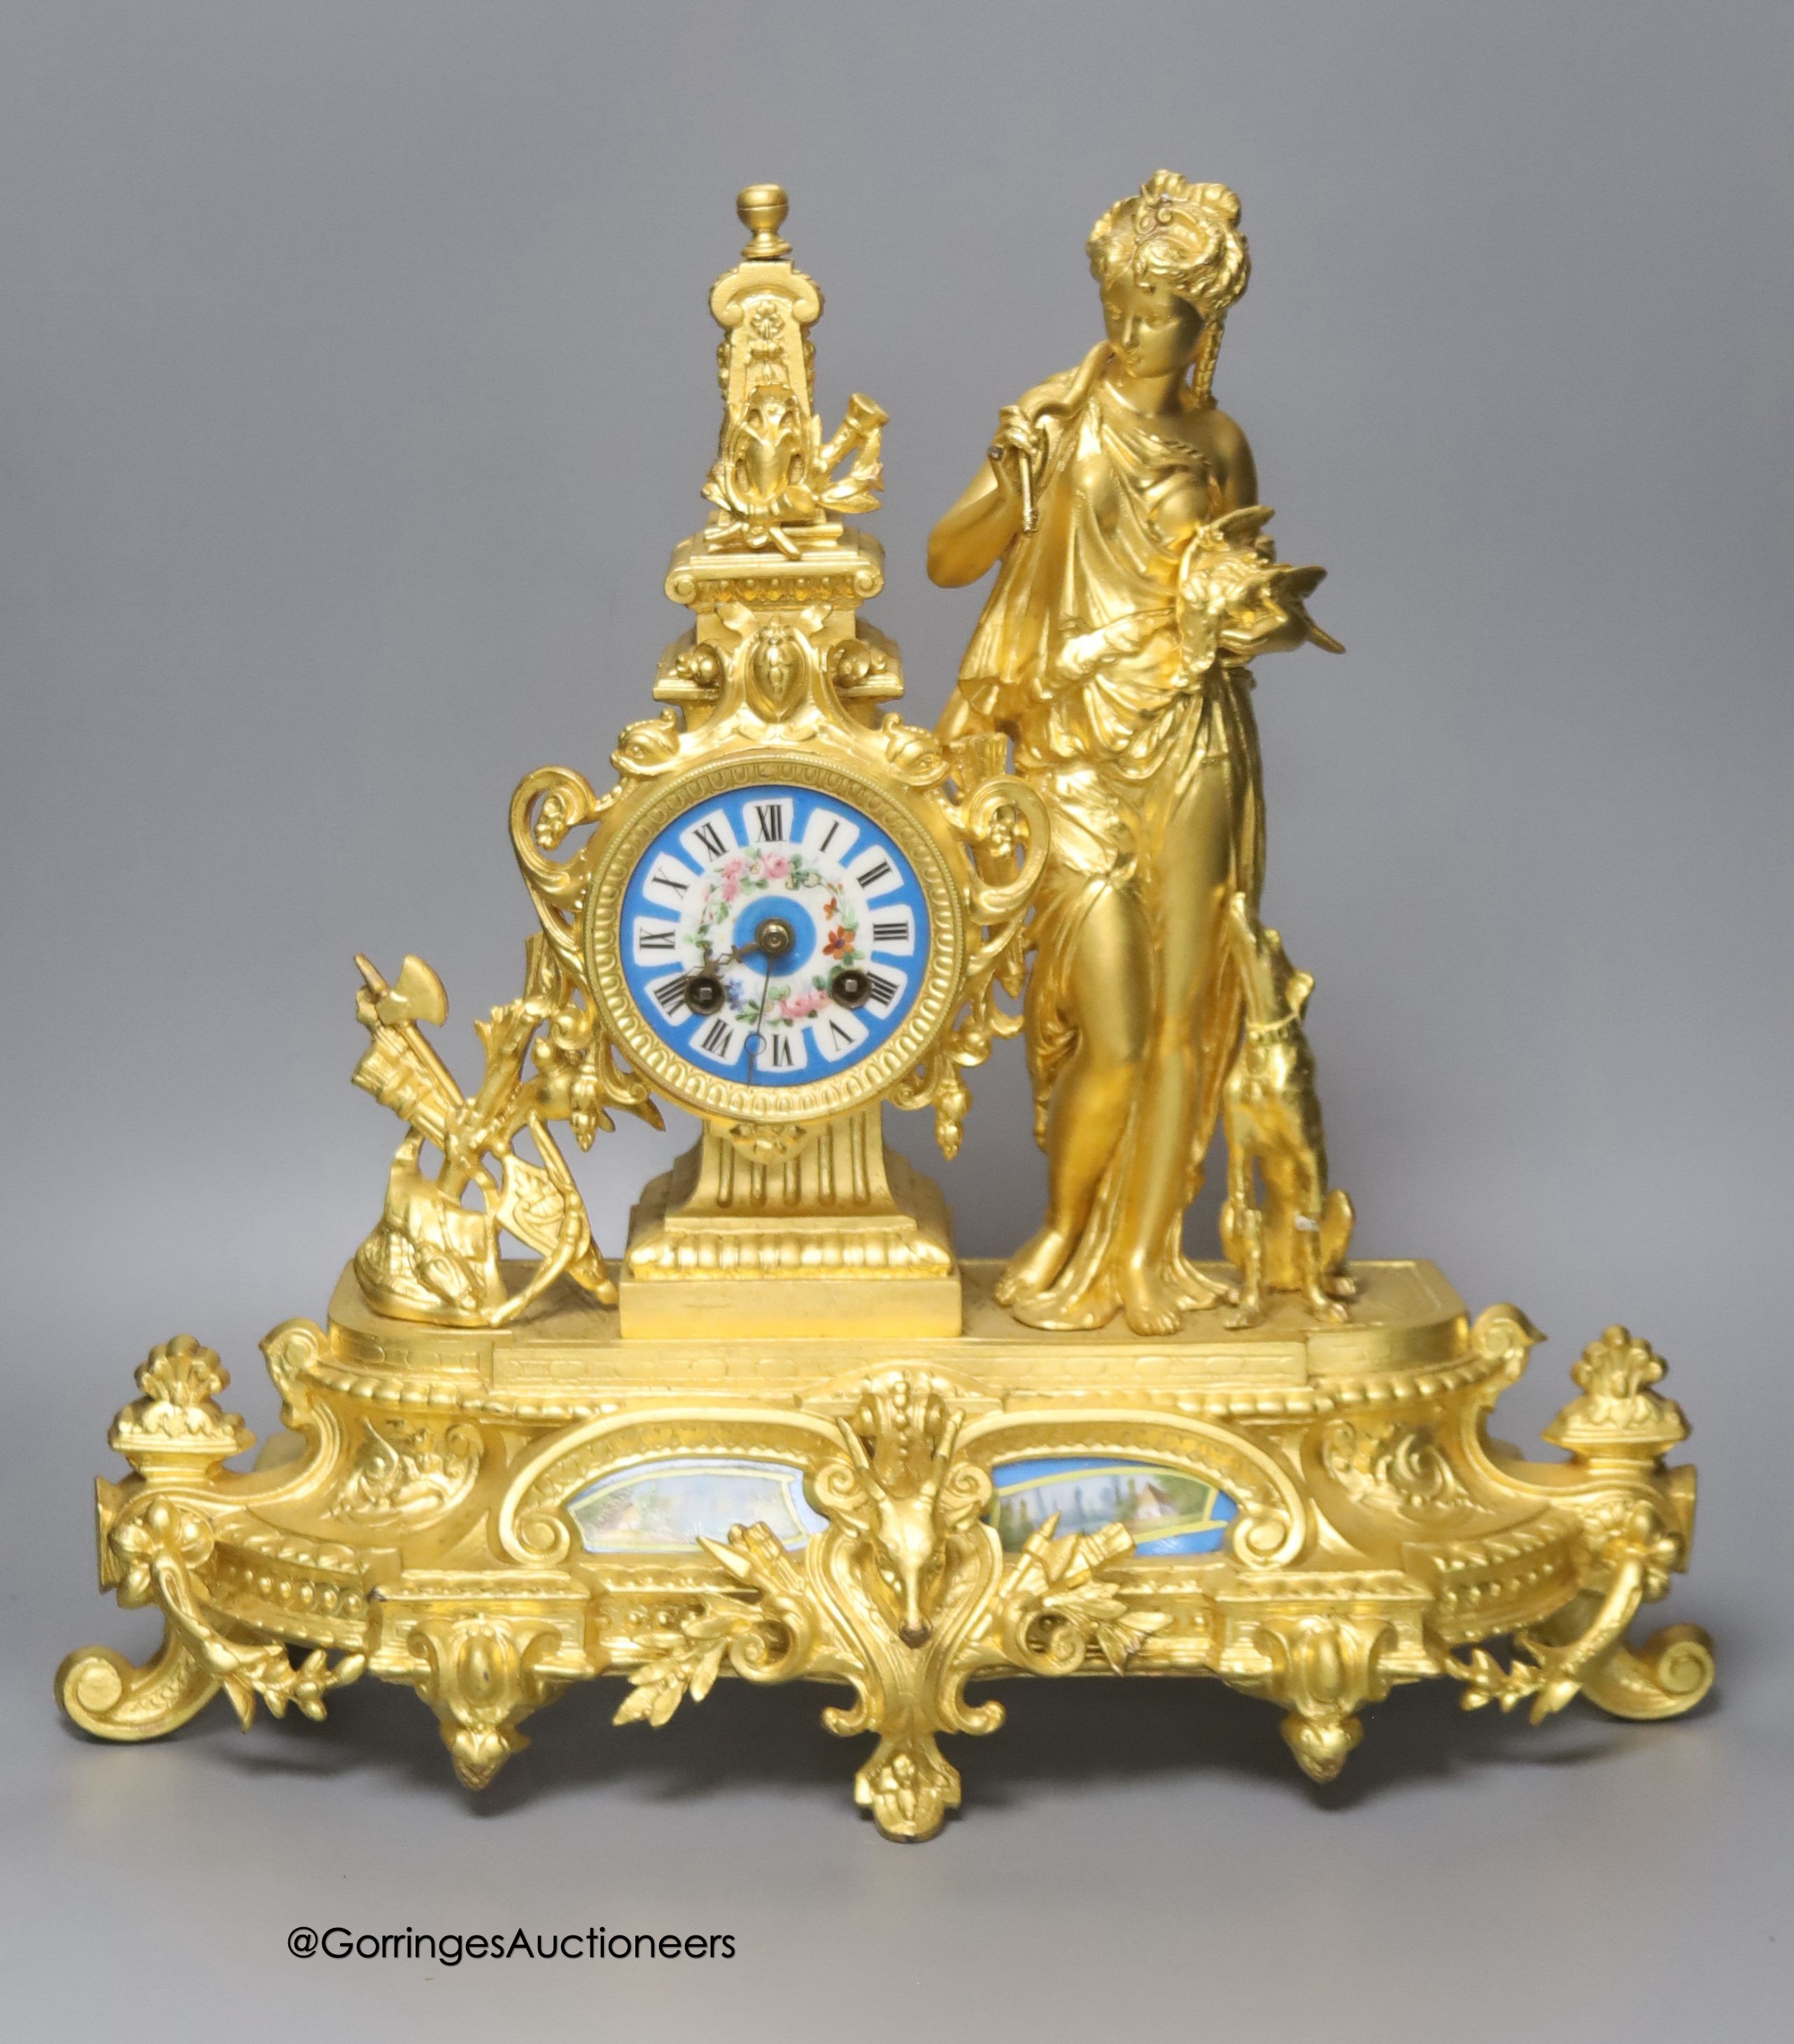 A late 19th century French gilt metal figural mantel clock, with Sevres style inserts, with key and pendulum, height 42cm